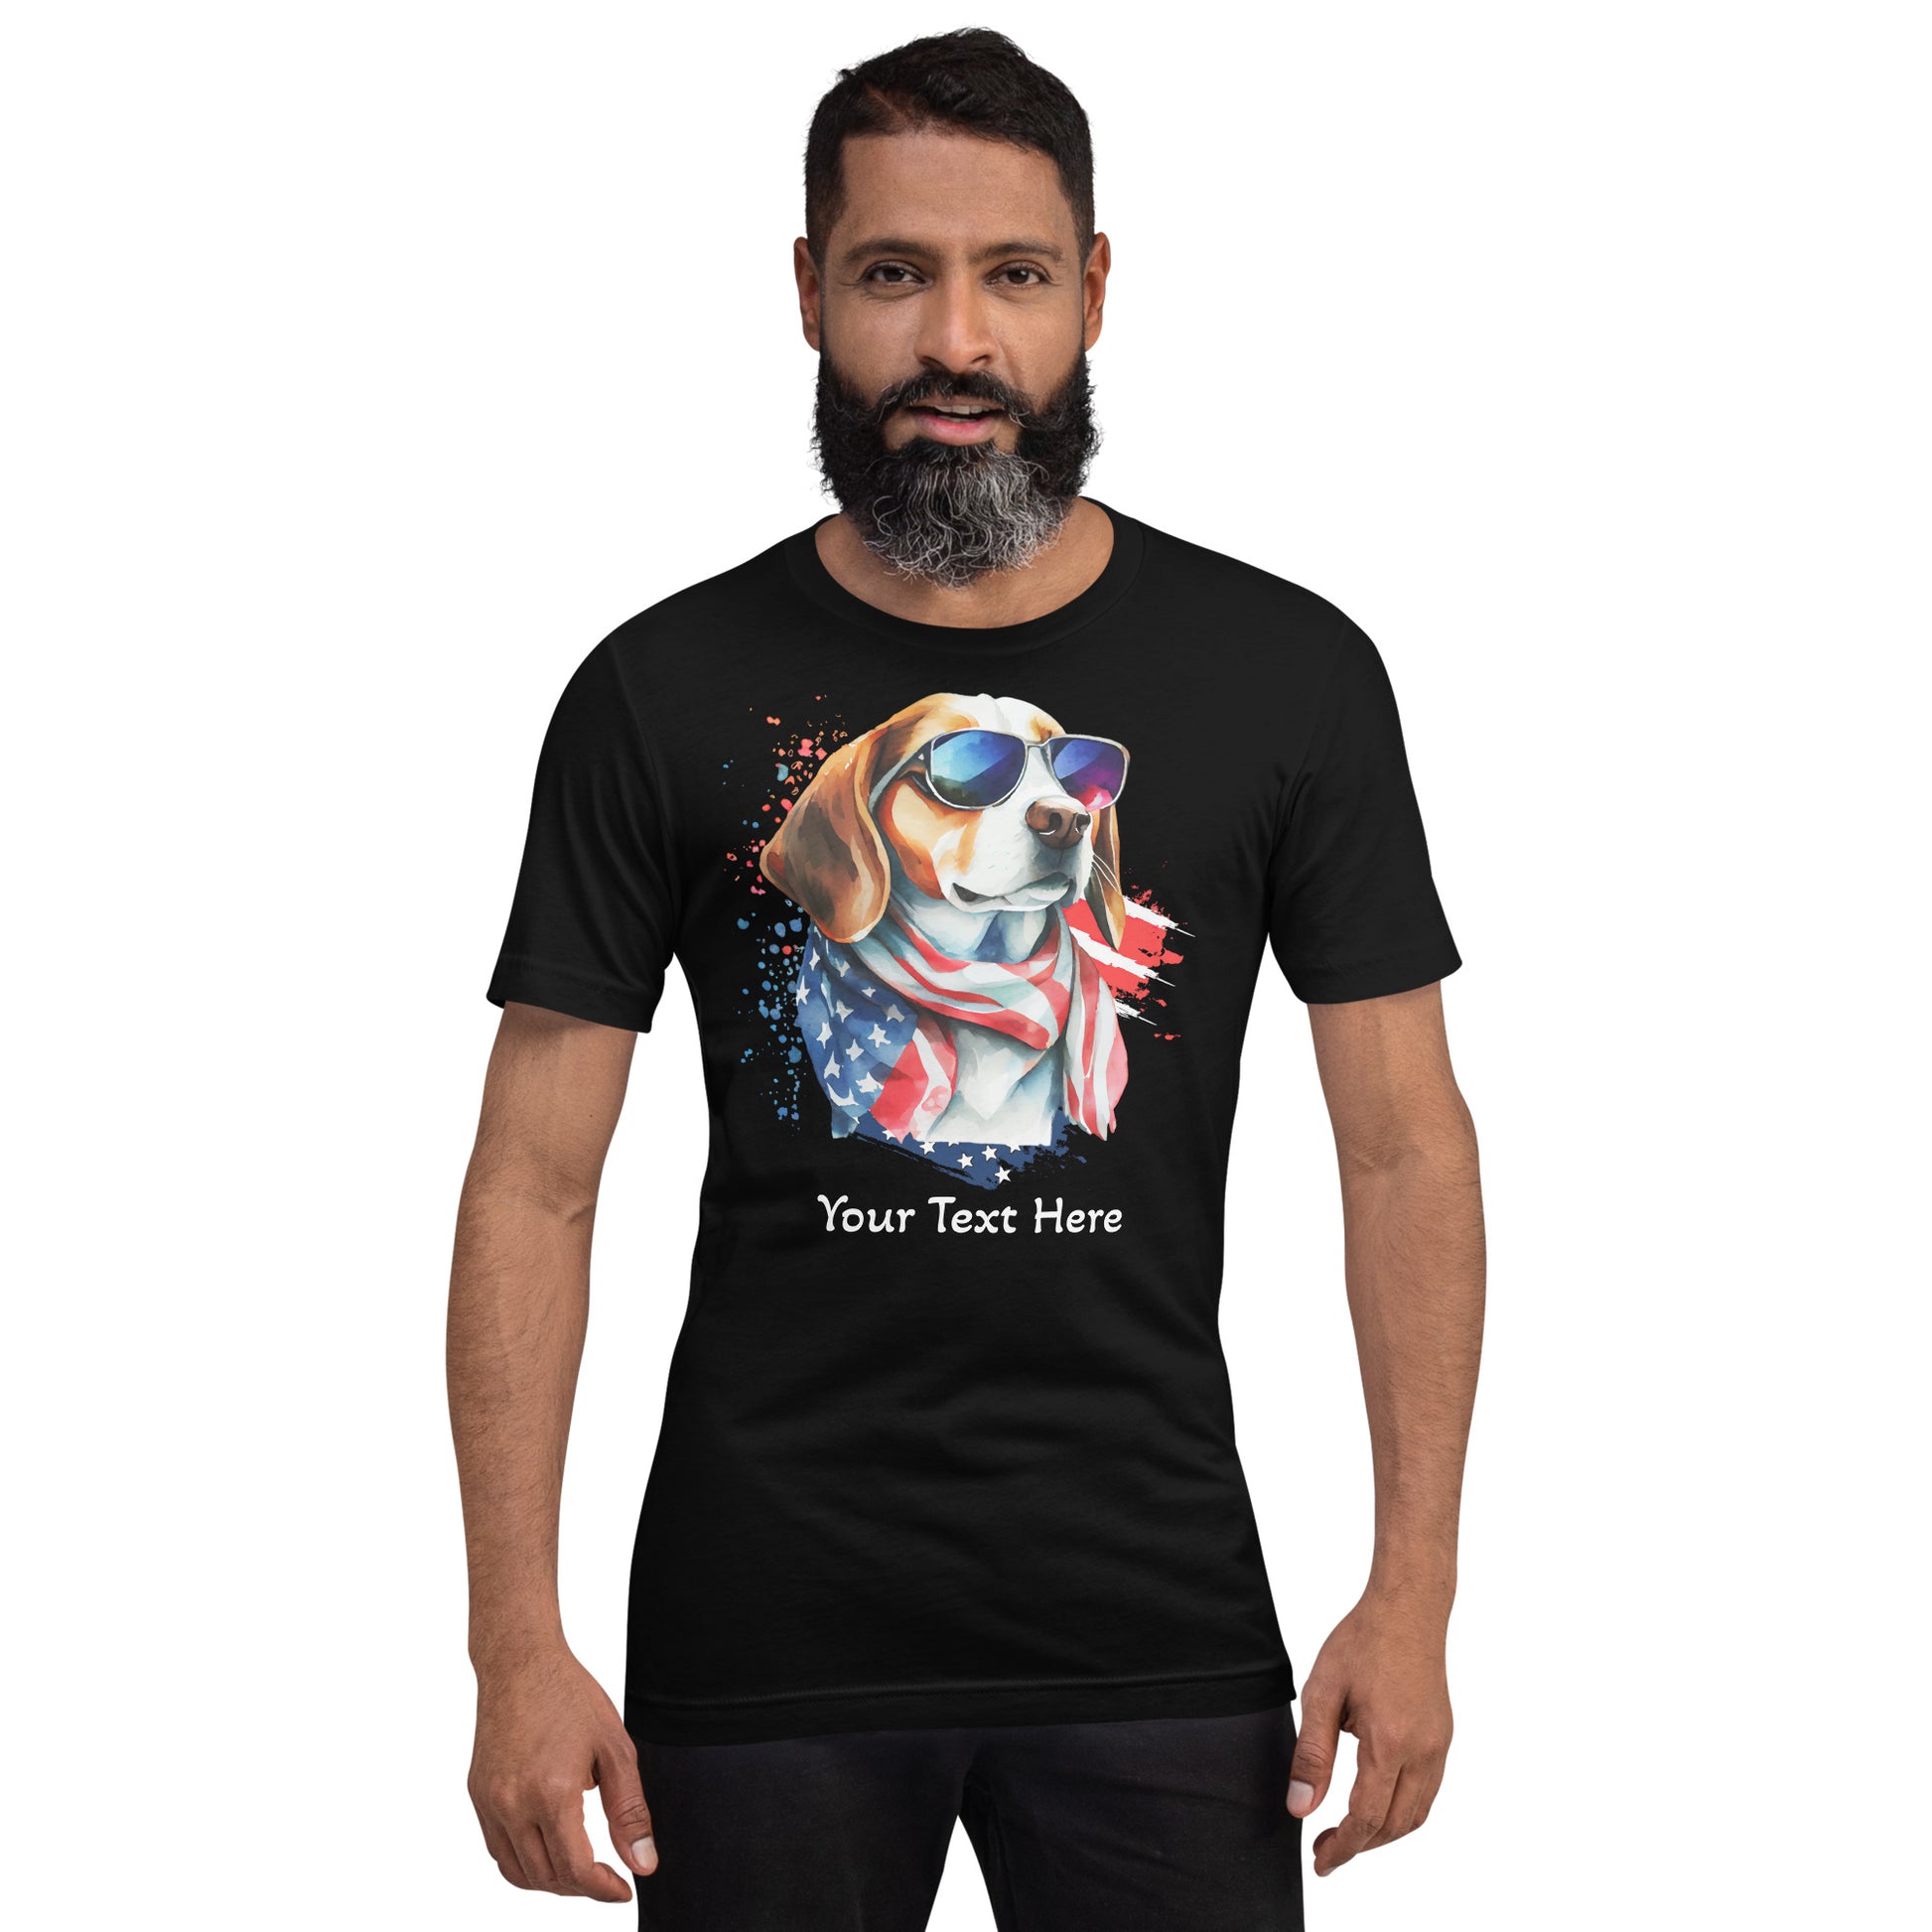 Man With Customizable Tshirt With Patriotic Dog